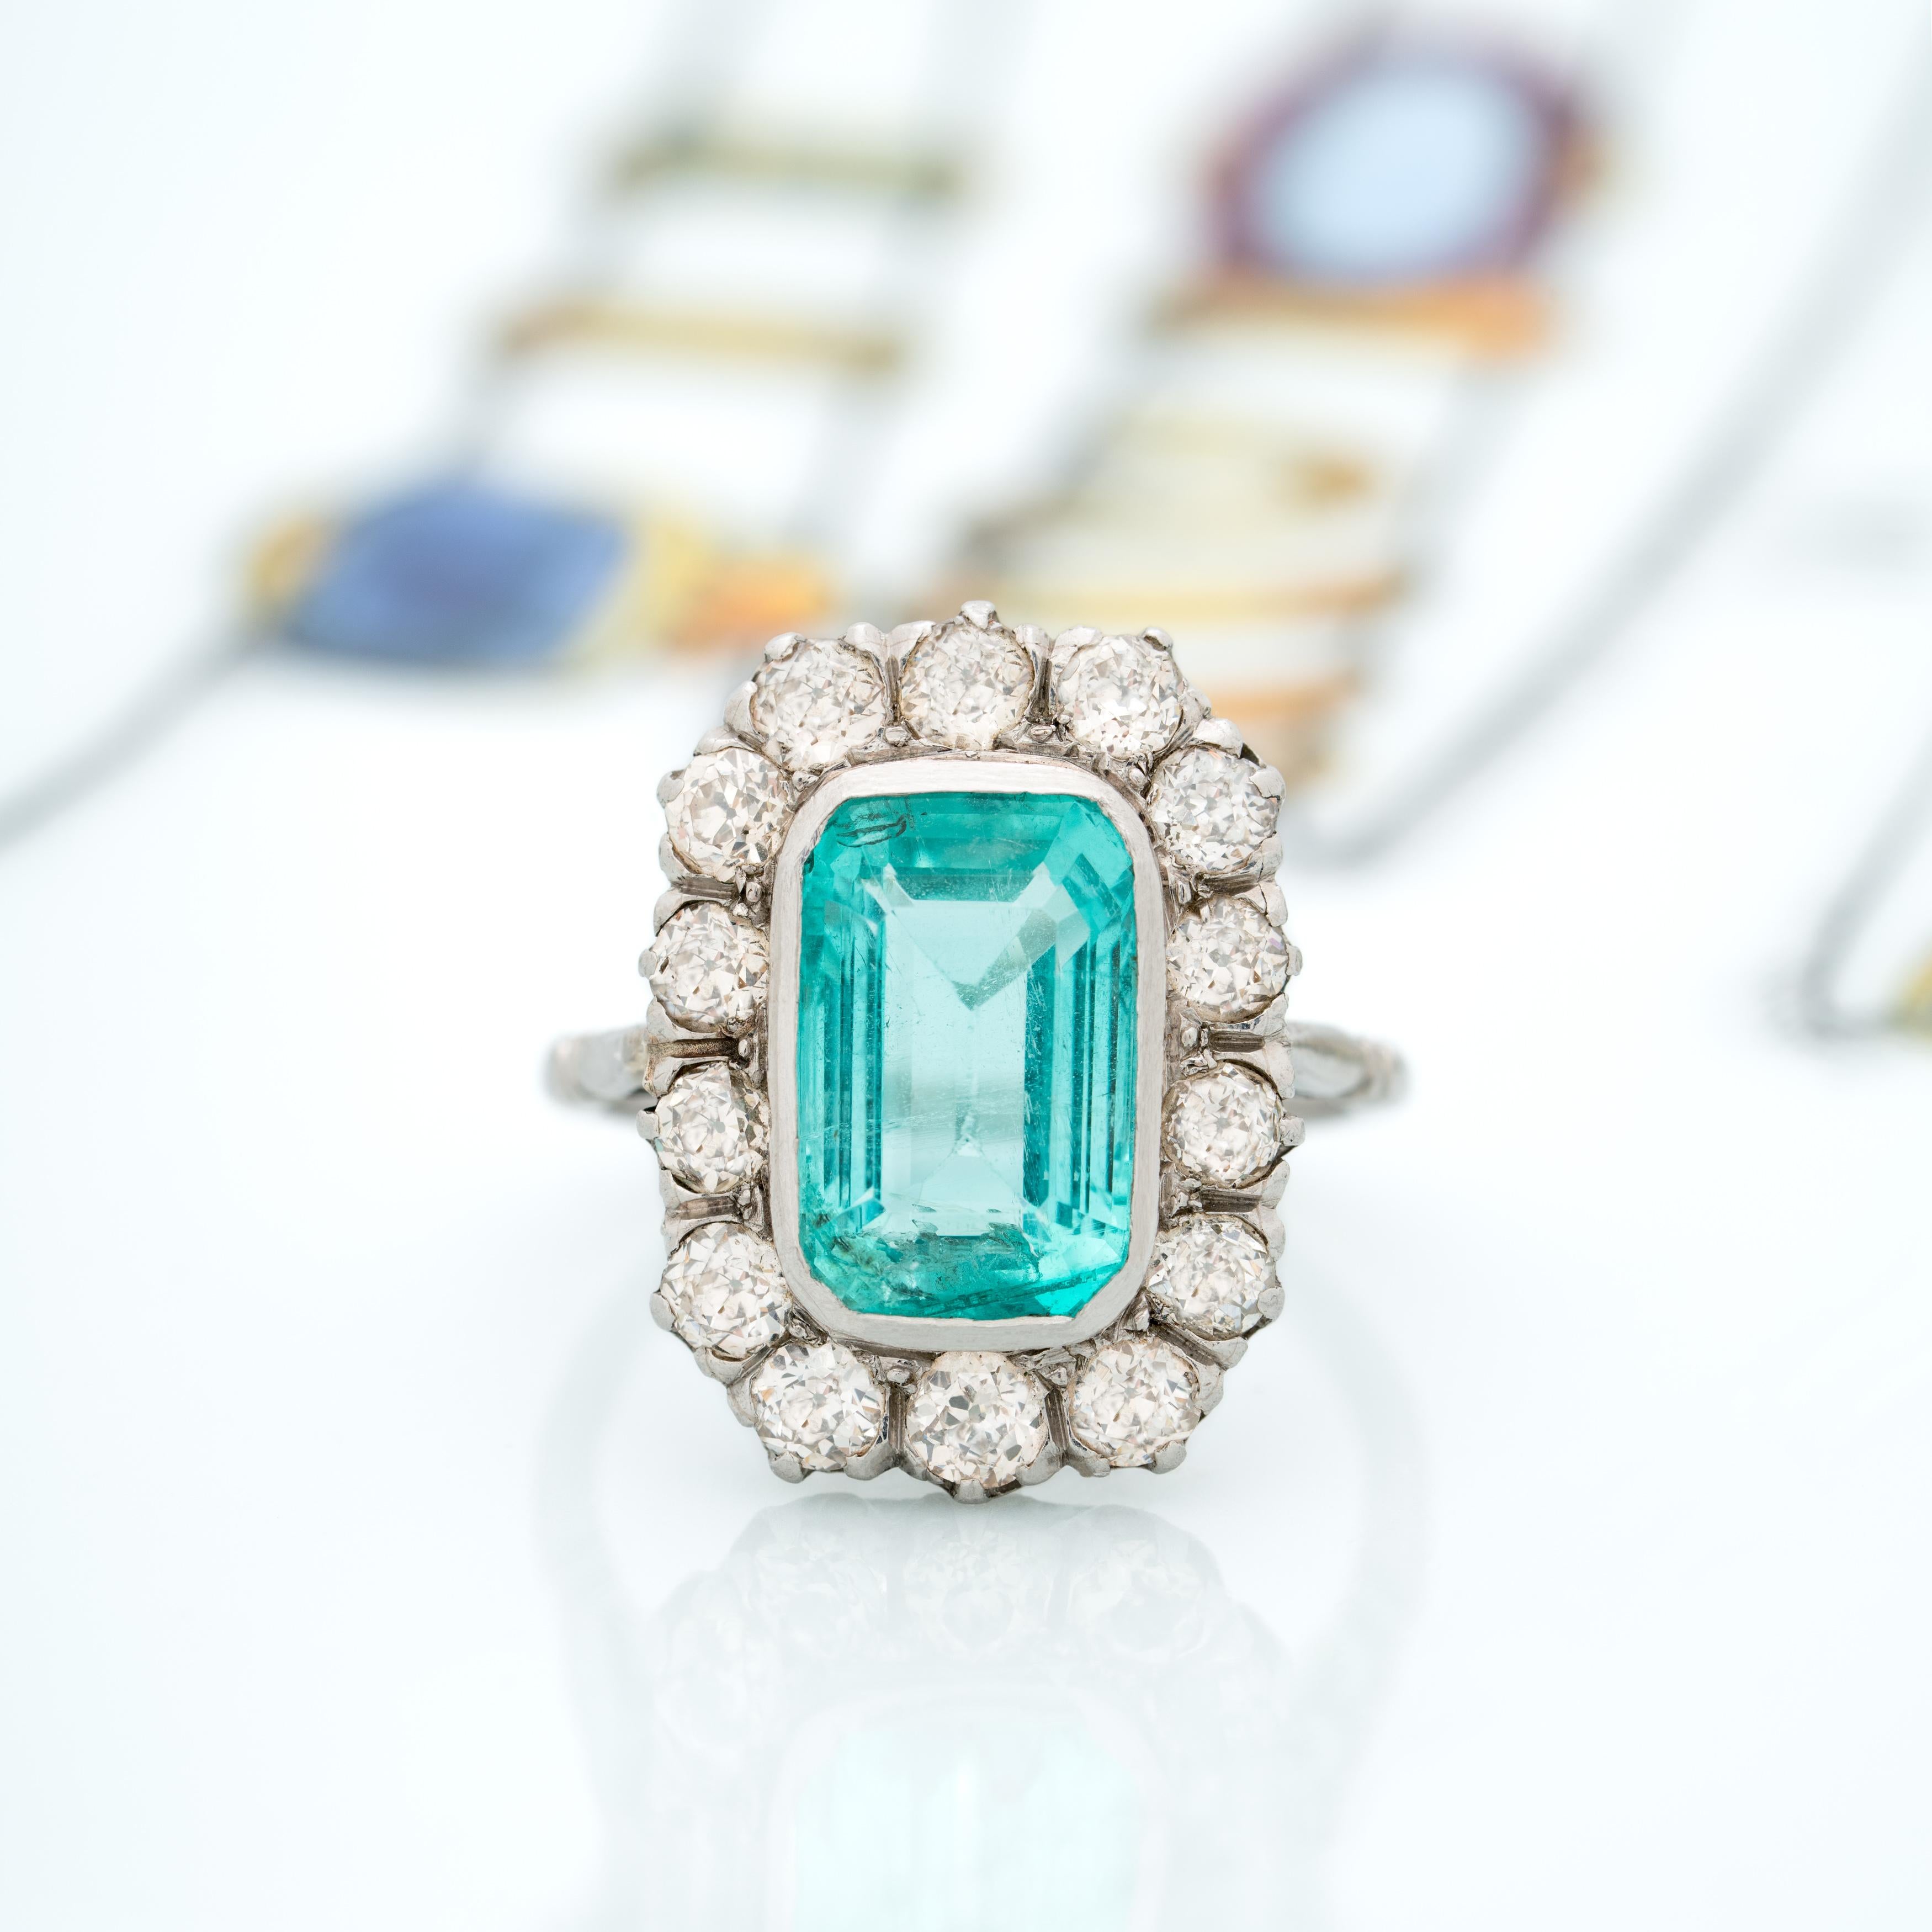 Edwardian Platinum and 4.5 Carat Colombian Emerald Ring and Diamond Ring For Sale 2